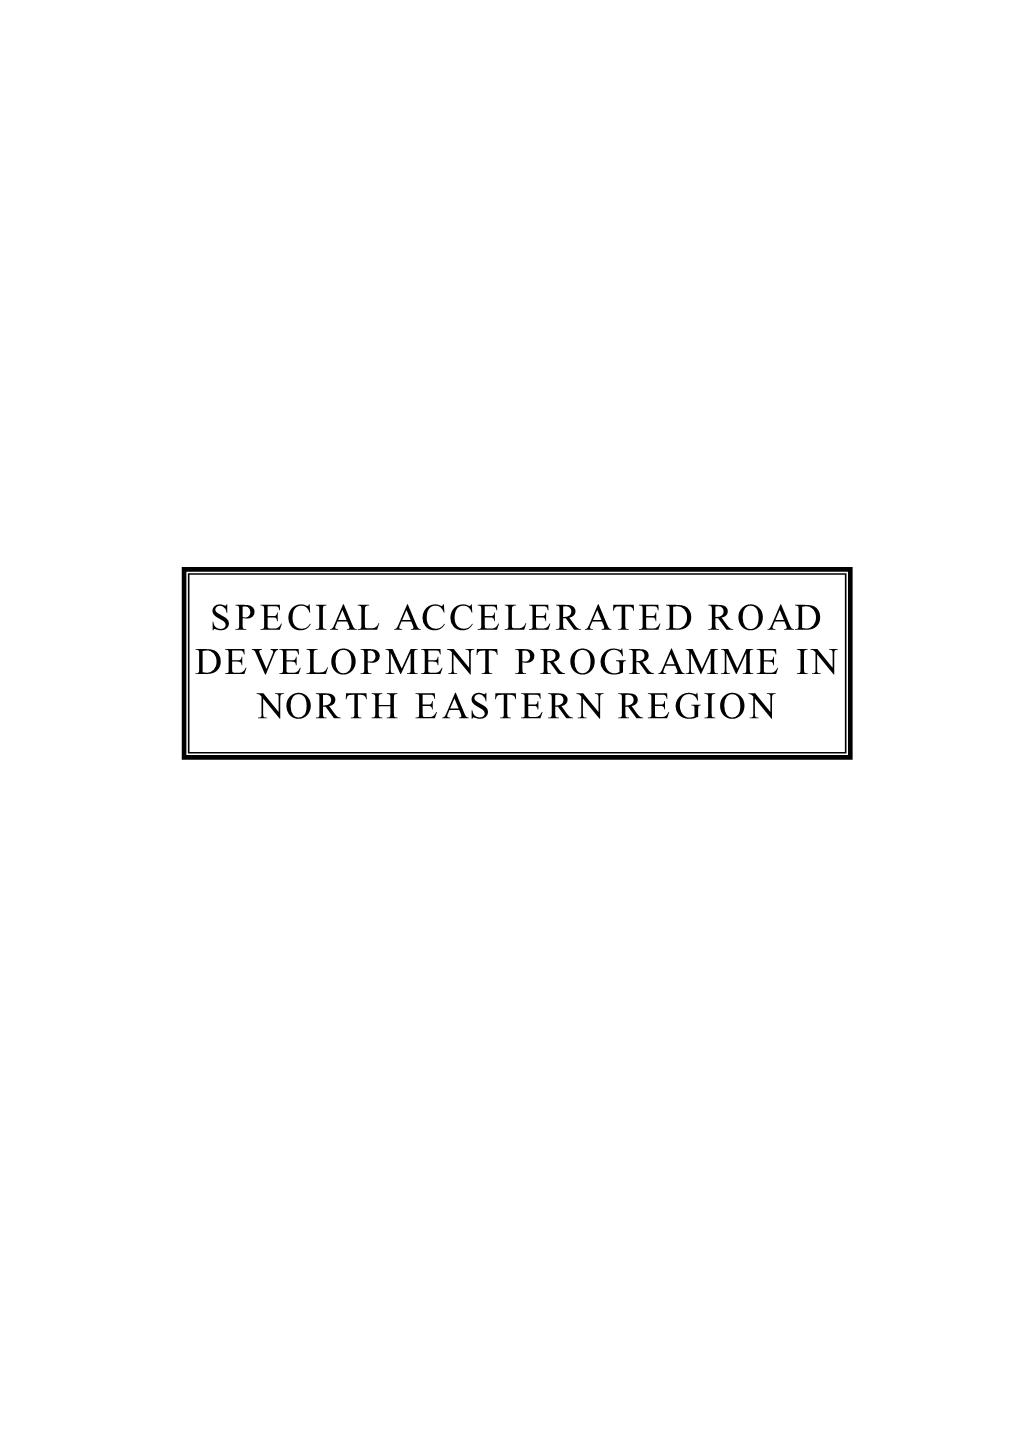 Special Accelerated Road Development Programme in North Eastern Region